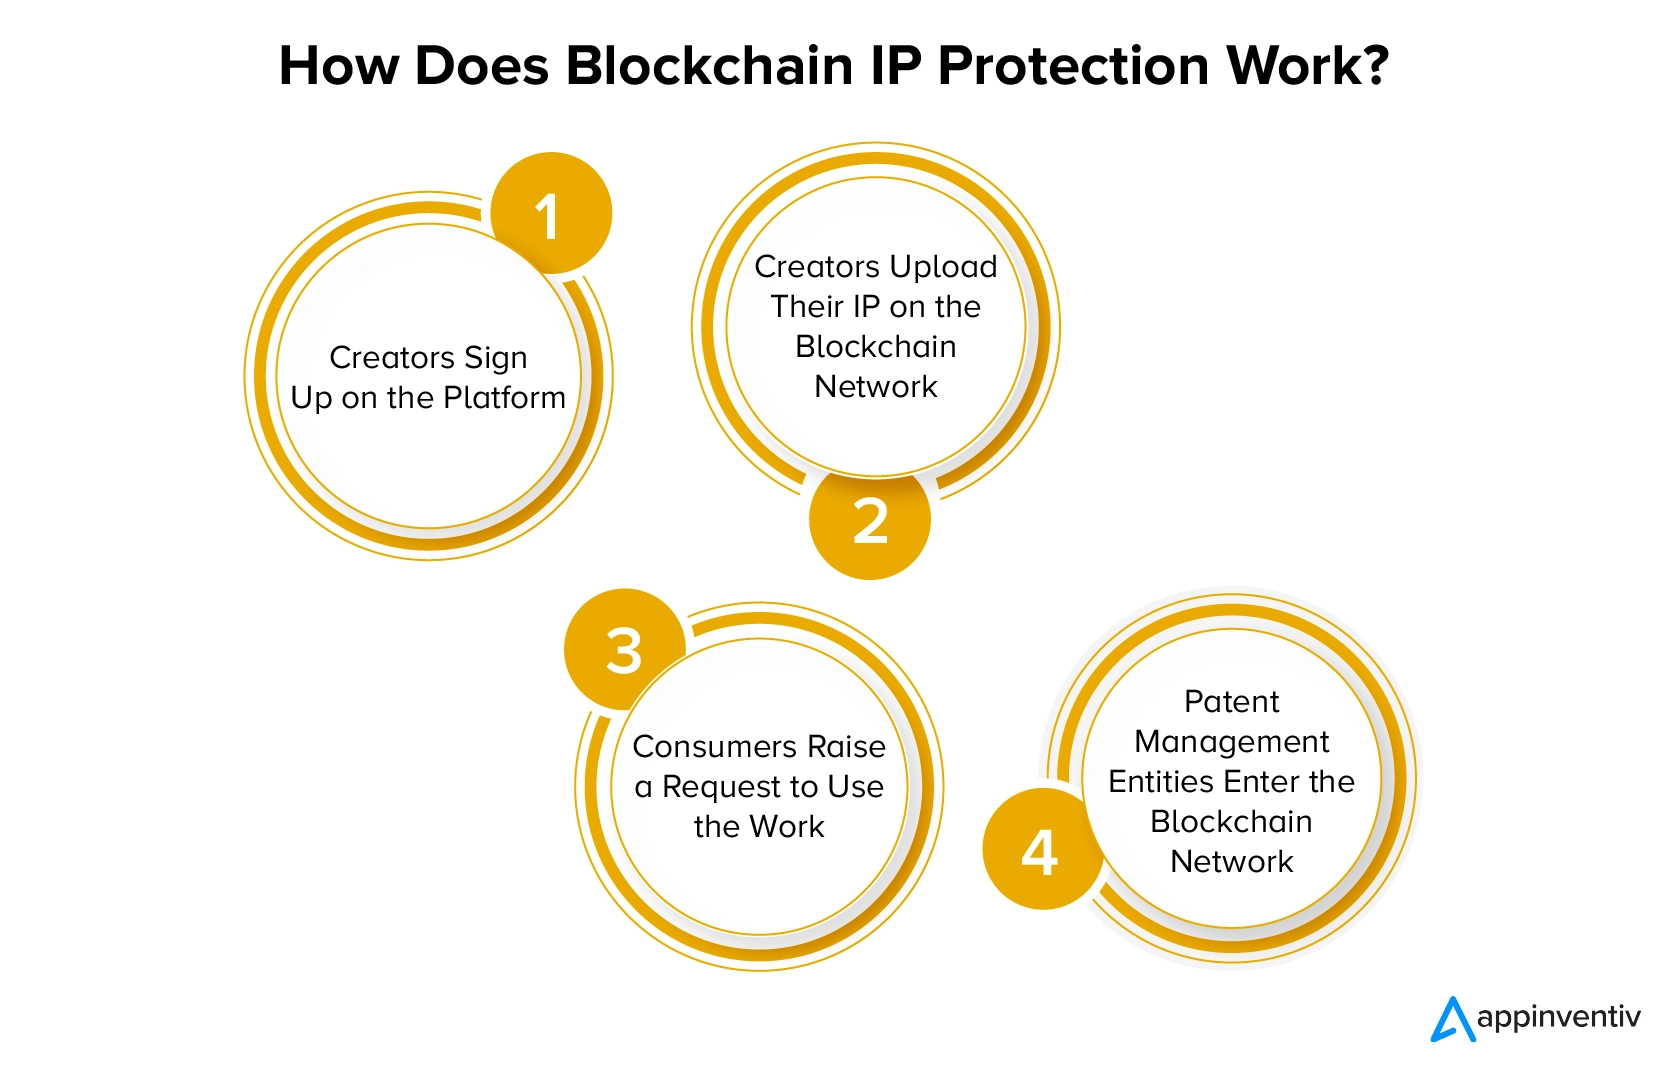 How does blockchain IP protection work